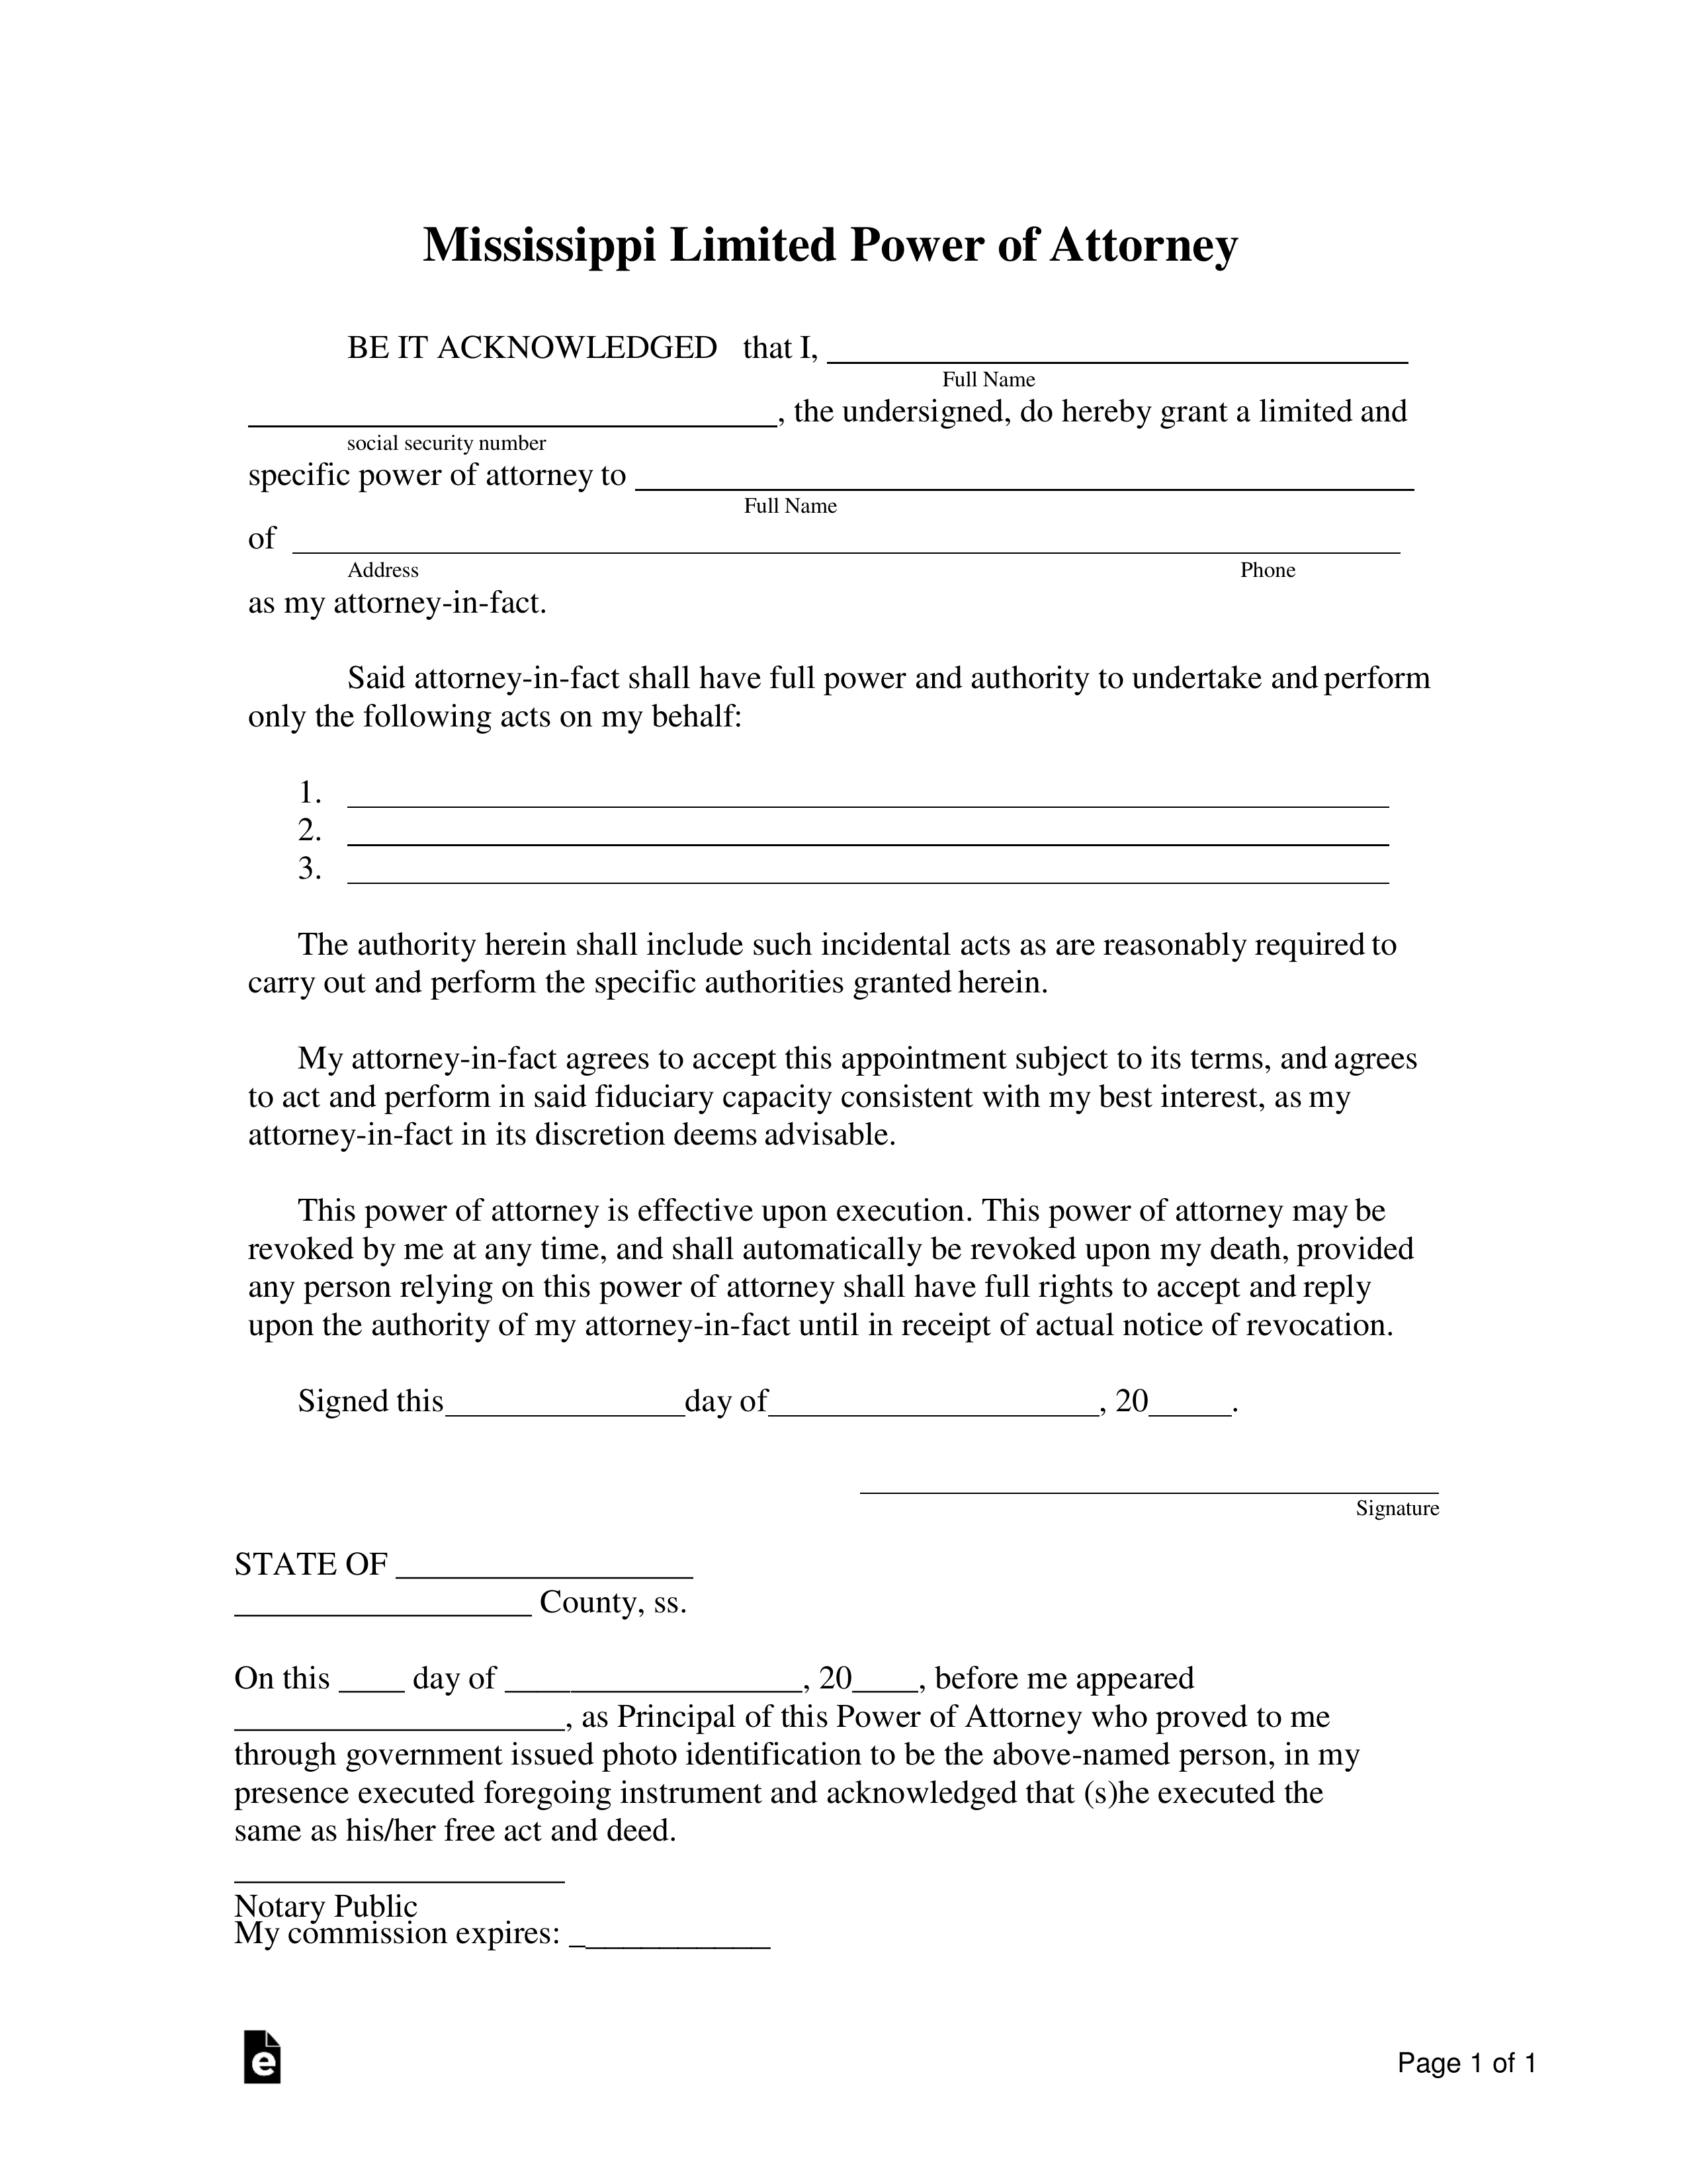 free-mississippi-limited-power-of-attorney-form-pdf-word-eforms